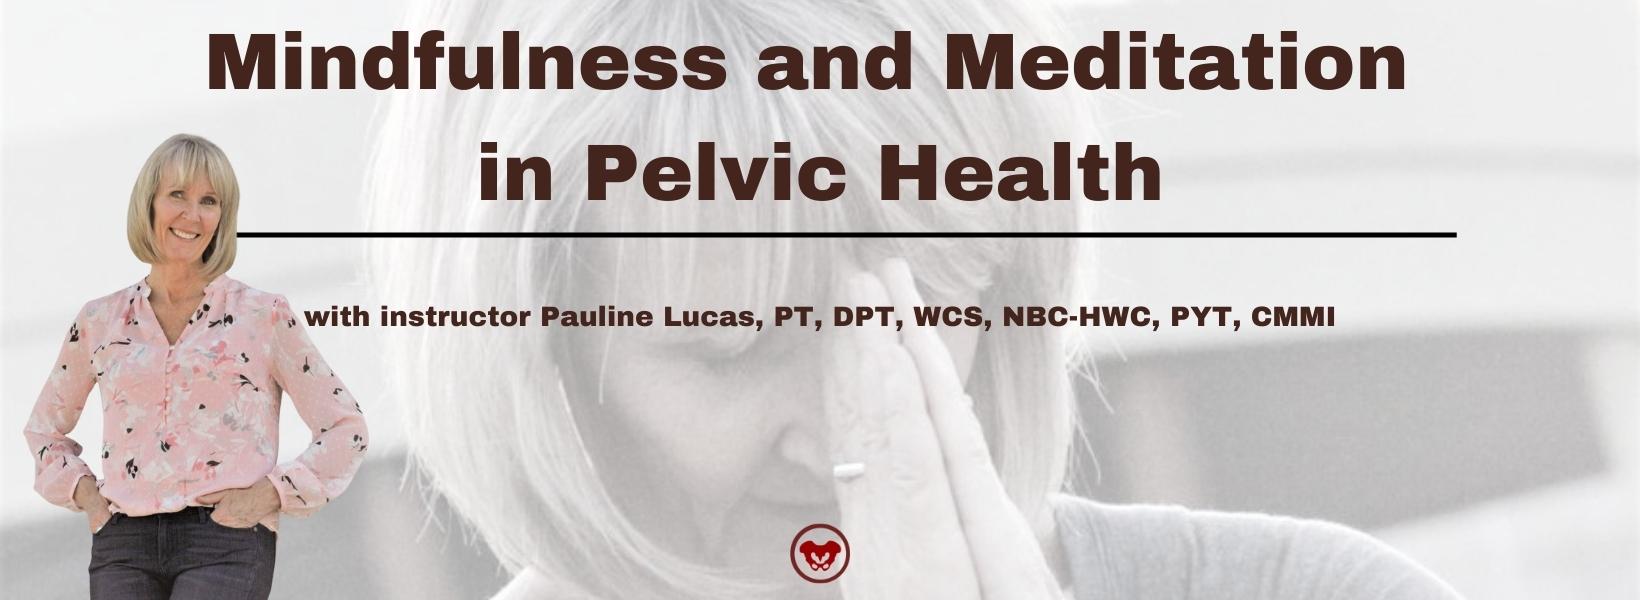 Mindfulness and Meditation in Pelvic Health